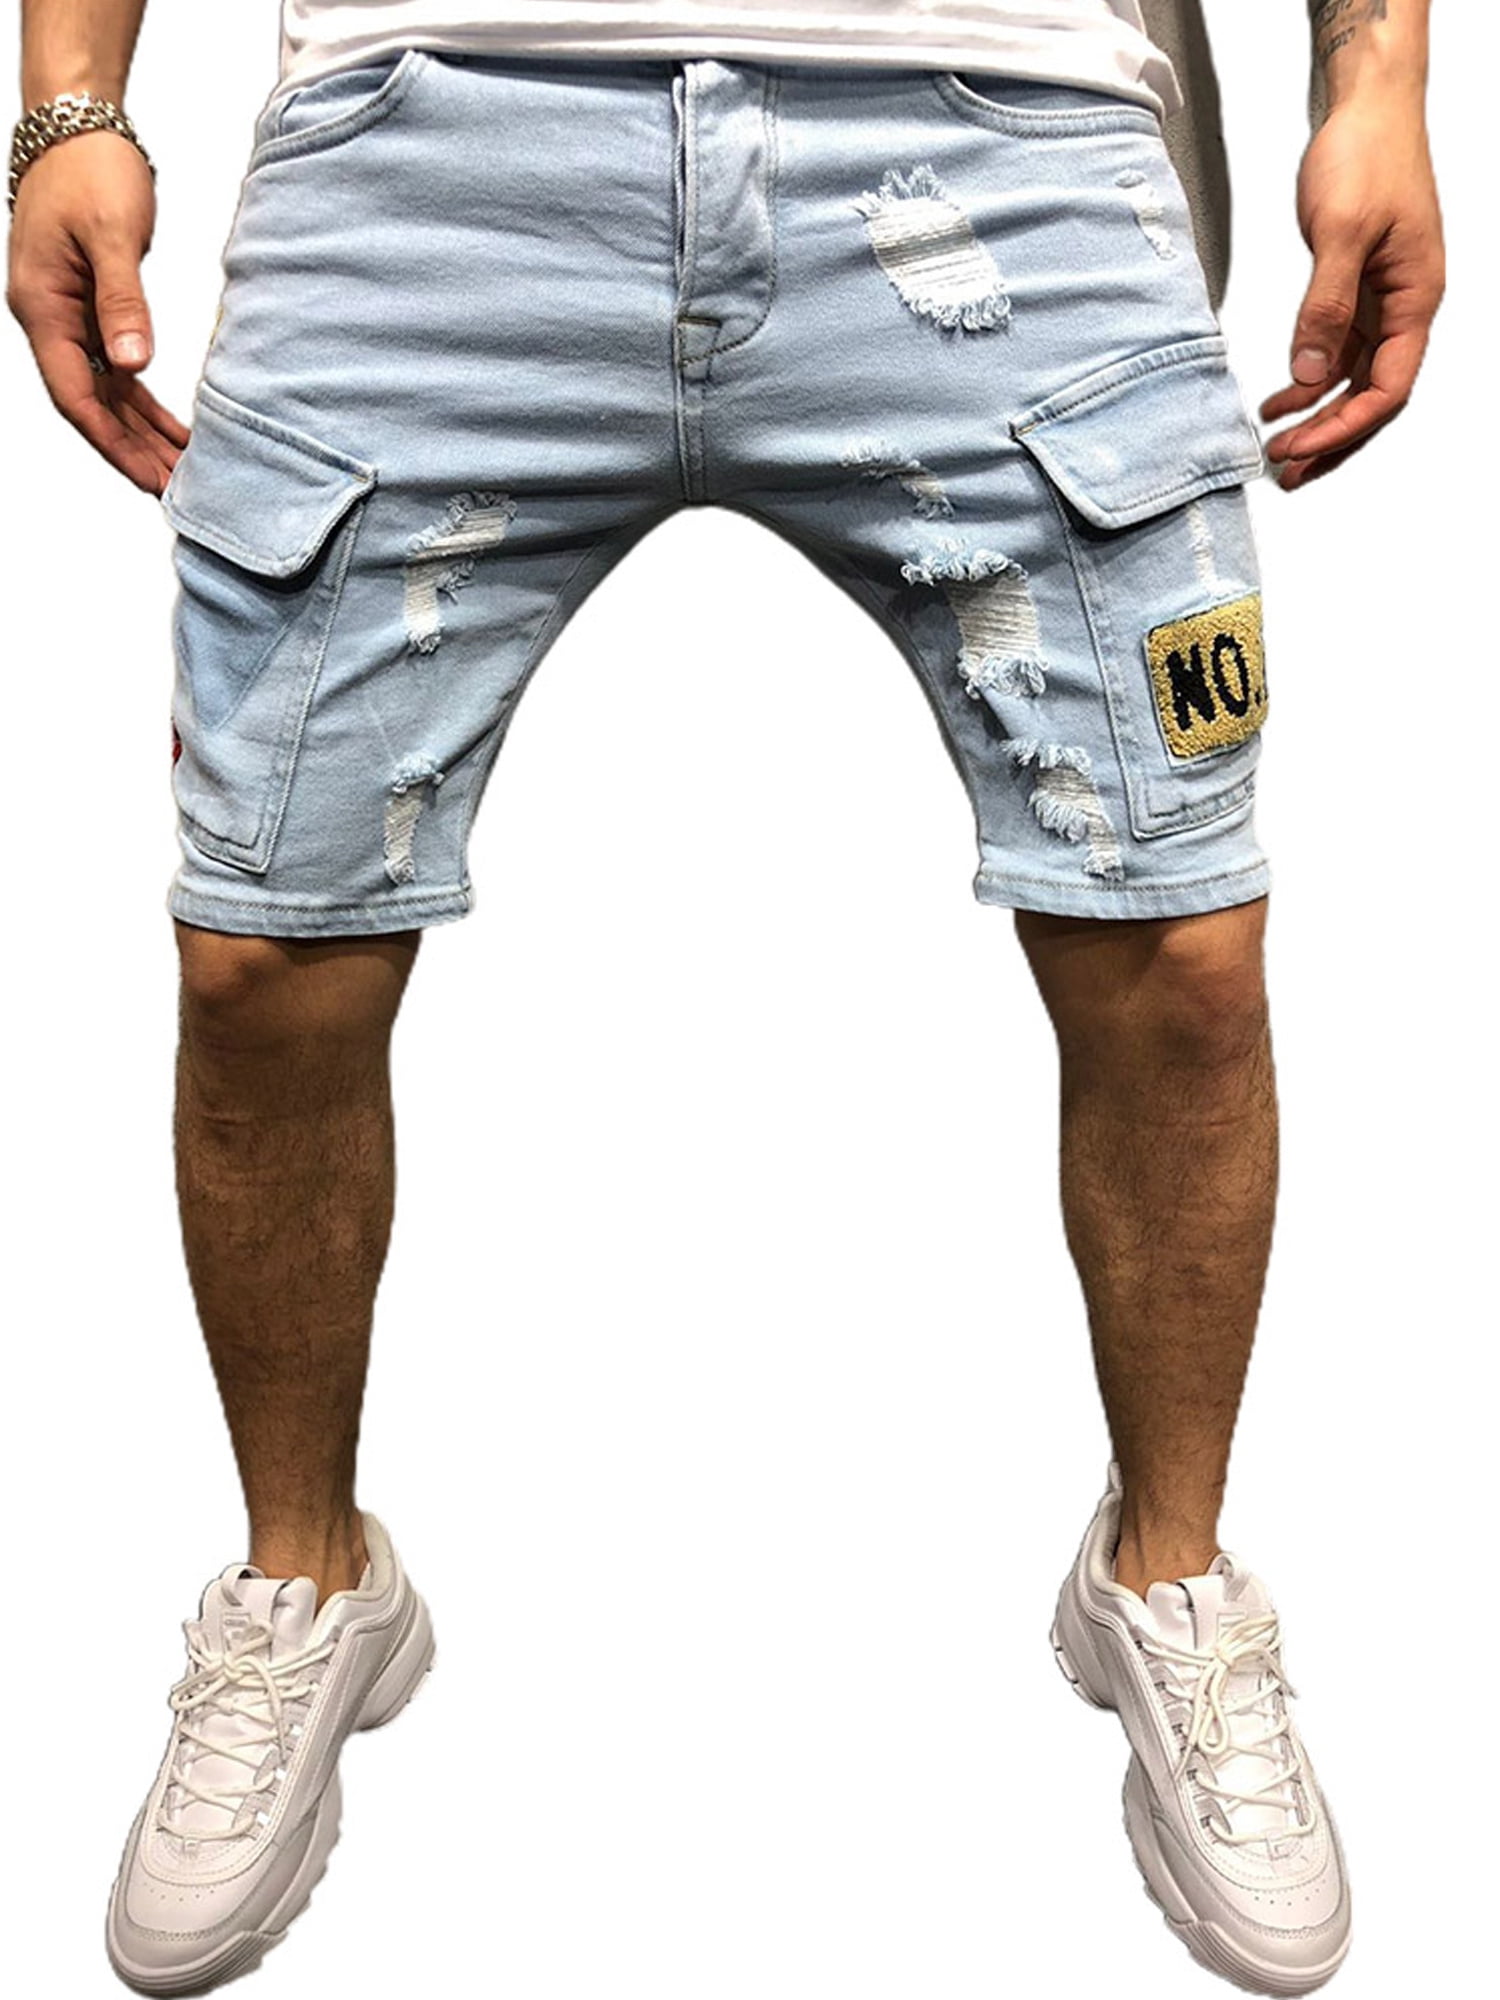 Mens Casual Jeans Shorts Classic Slim Fit 7 Inseam Pocket Shorts Summer Plus Size Overalls Shorts Workout Shorts